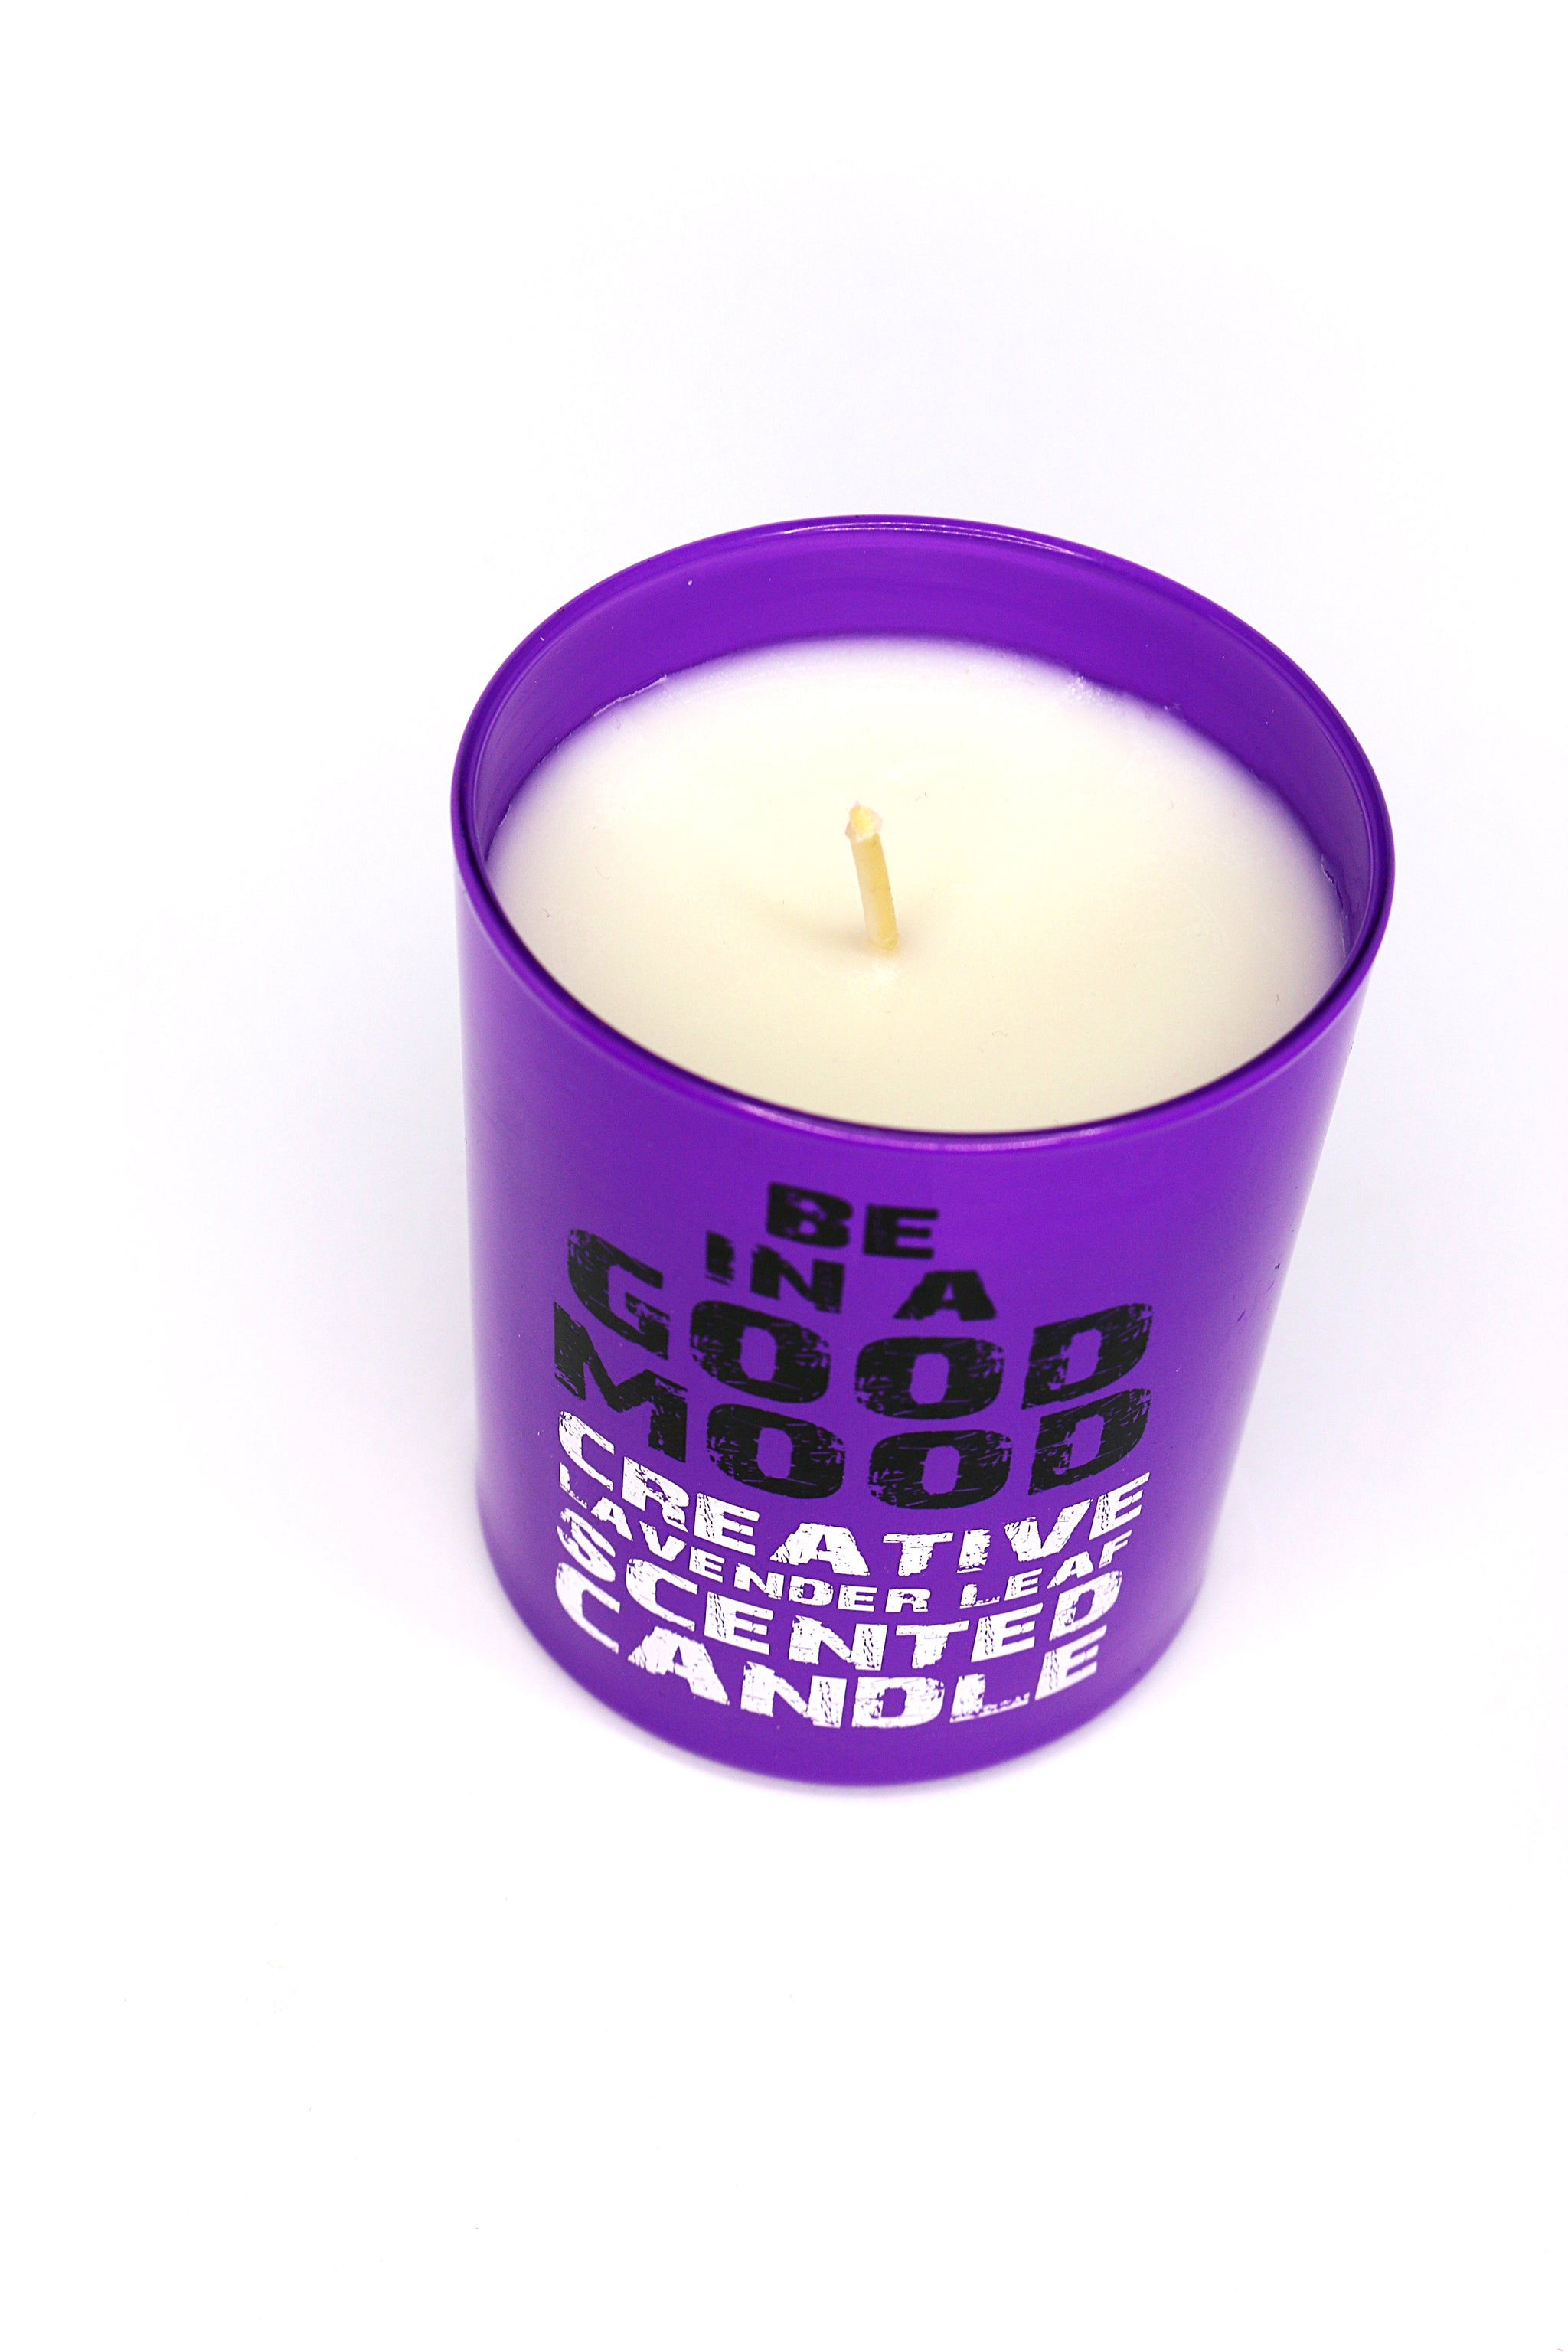 Be in a Good Mood Creative Lavender Leaf Scented Candle